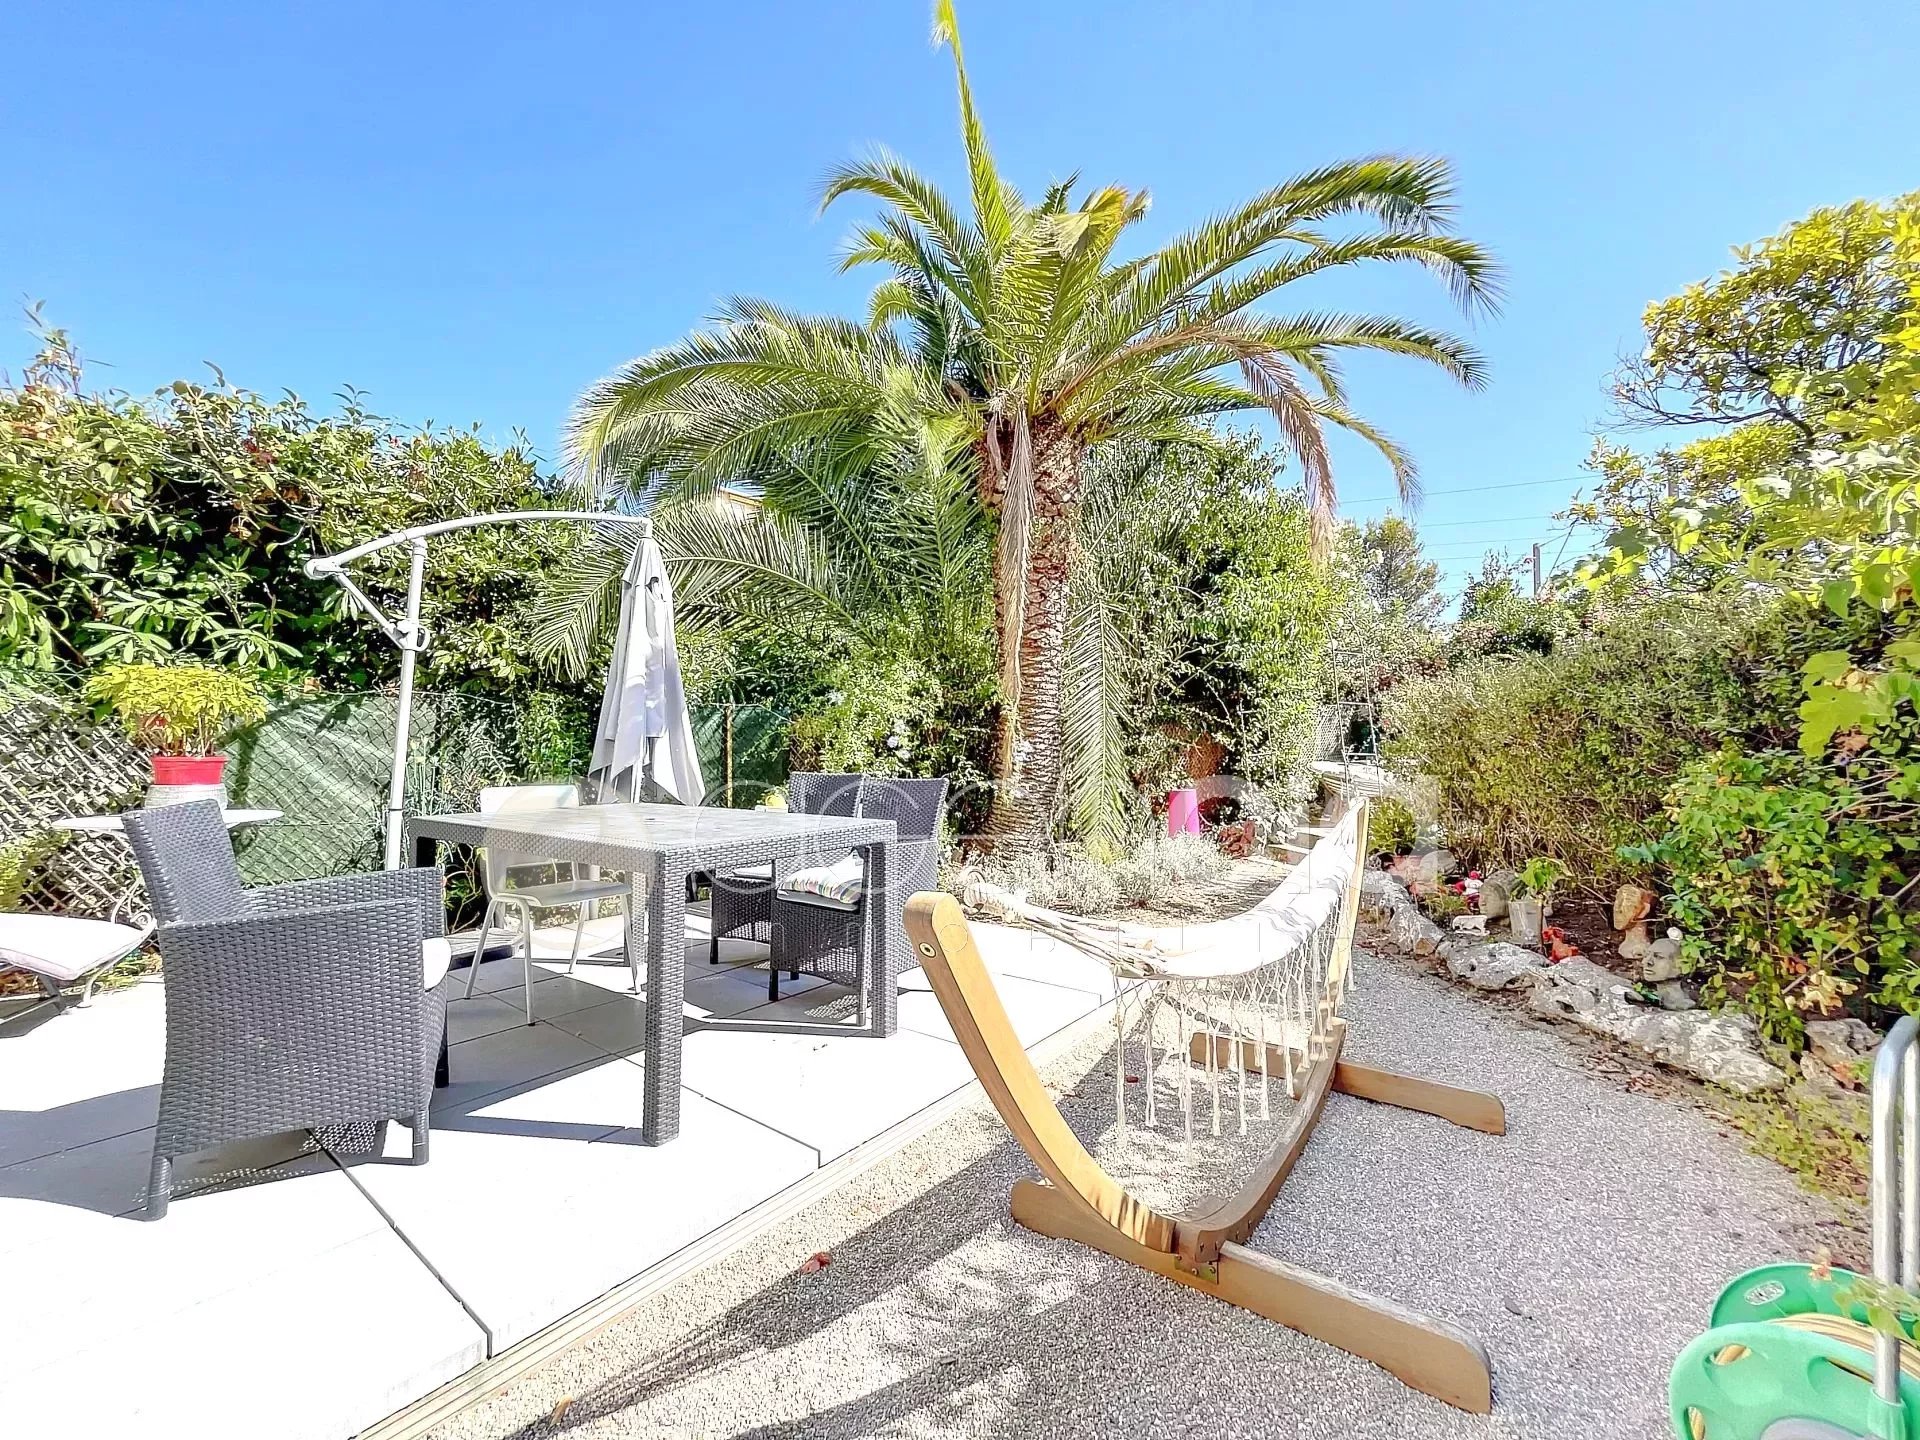 2P with garden, access to the beaches of Midi.